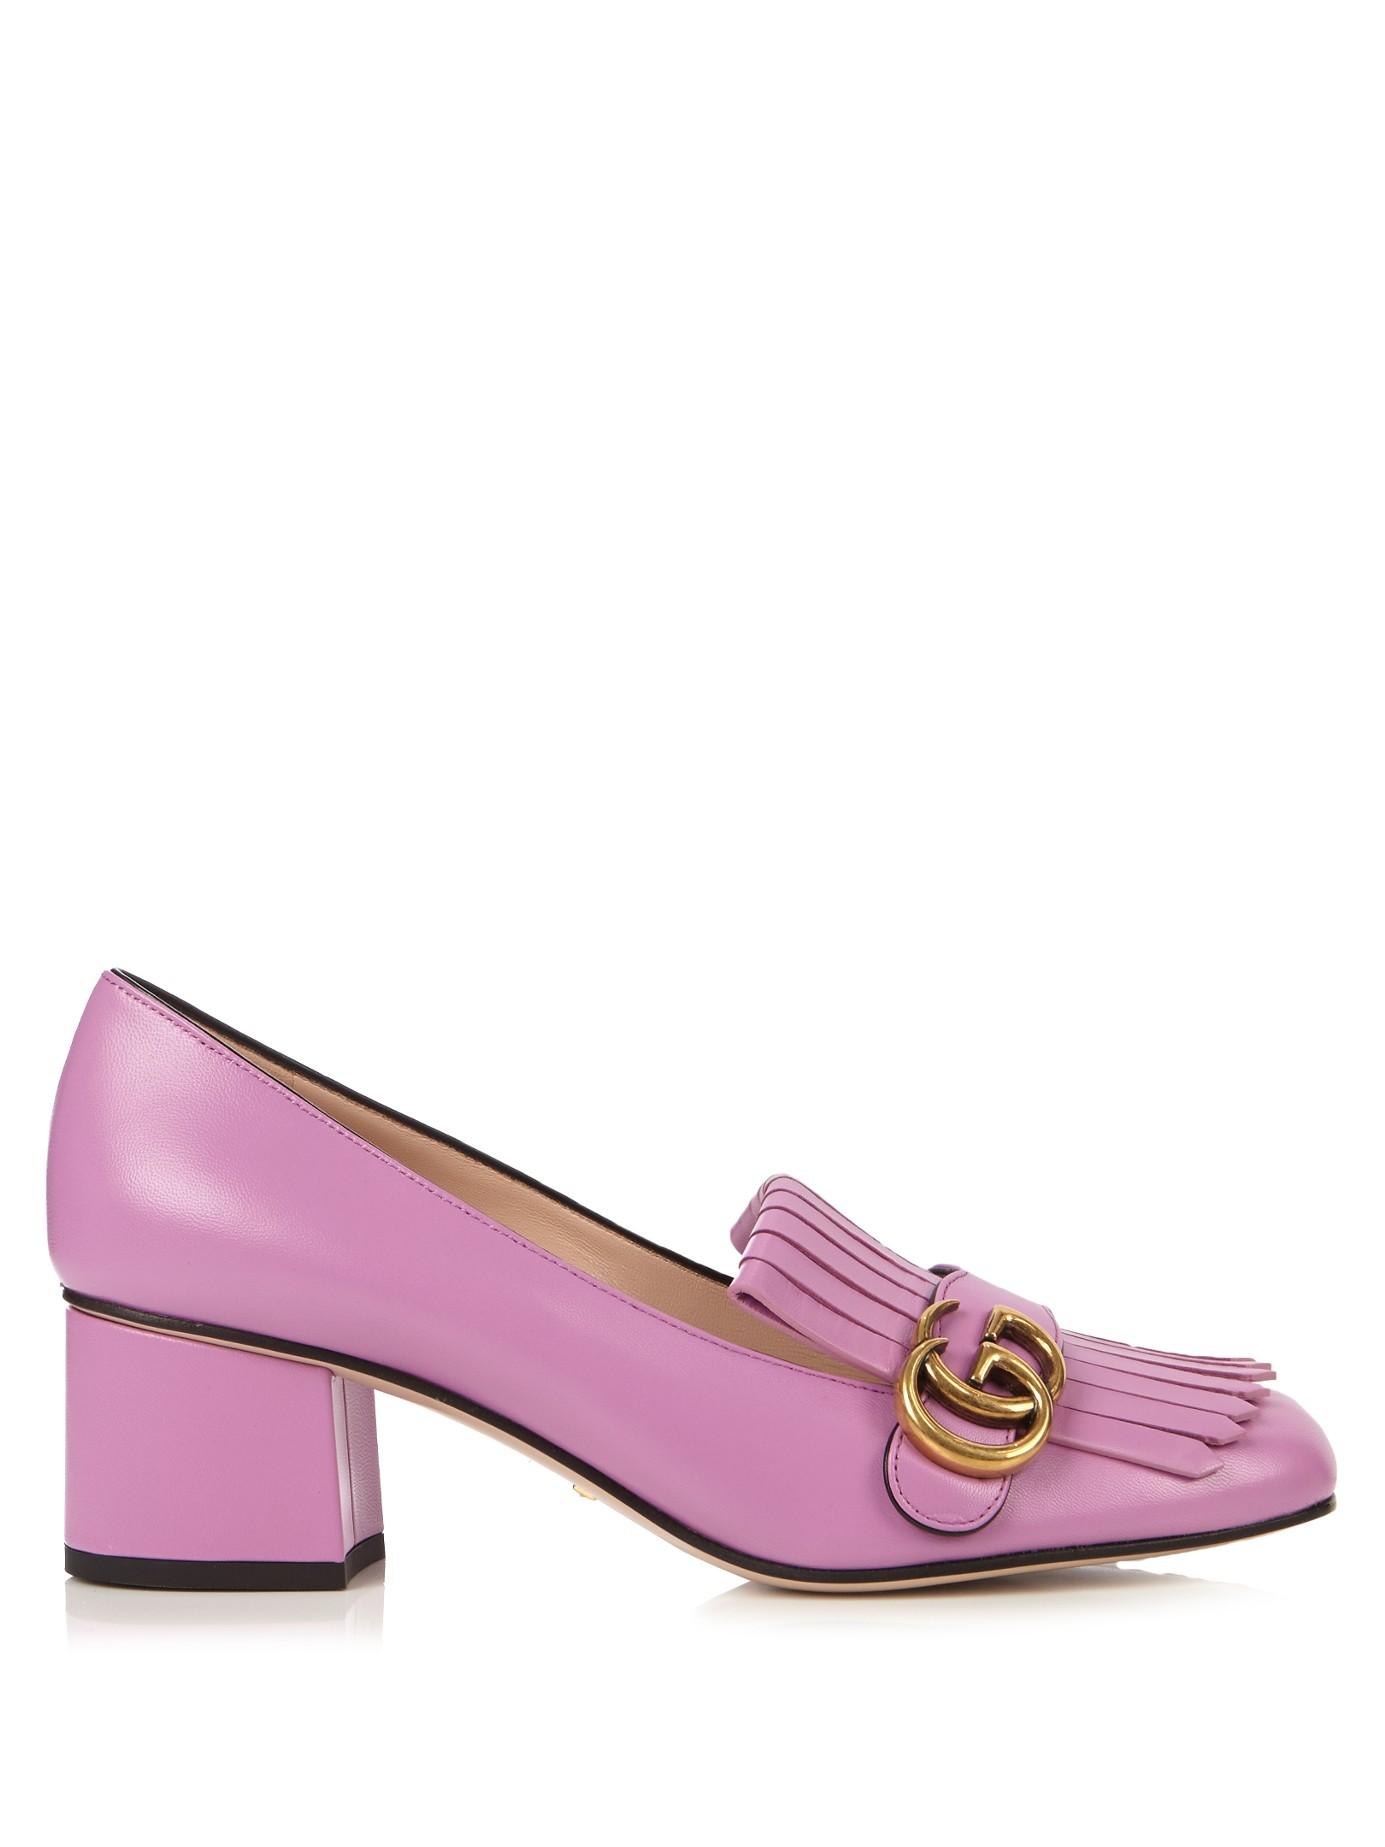 Lyst - Gucci Marmont Fringed Leather Loafers in Pink